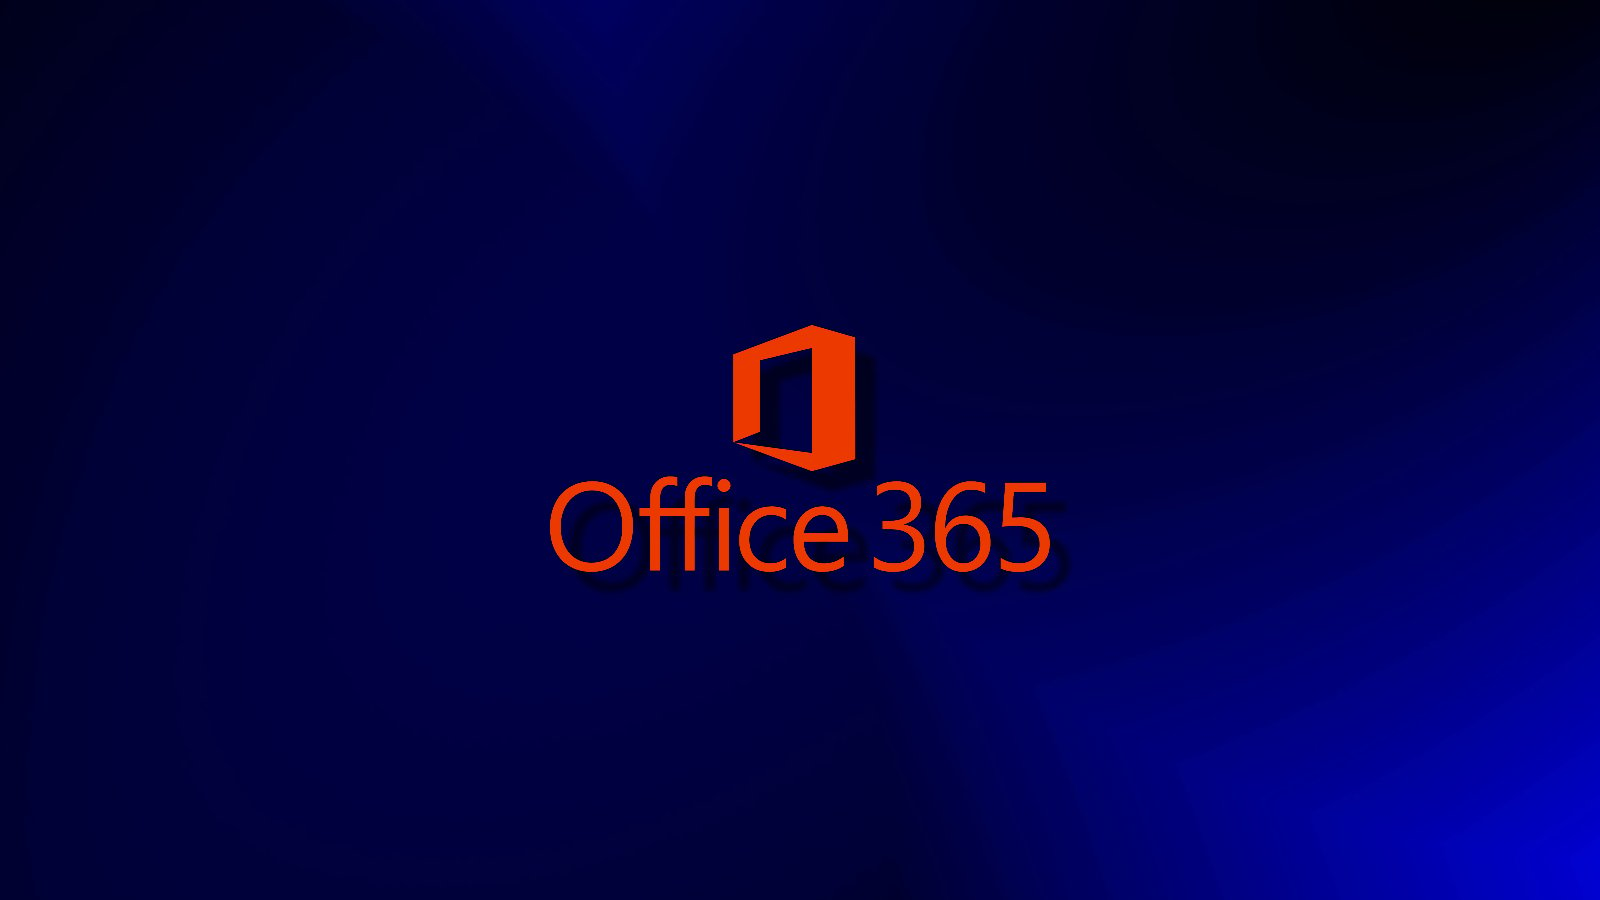 Microsoft Office 365 email encryption could expose message content